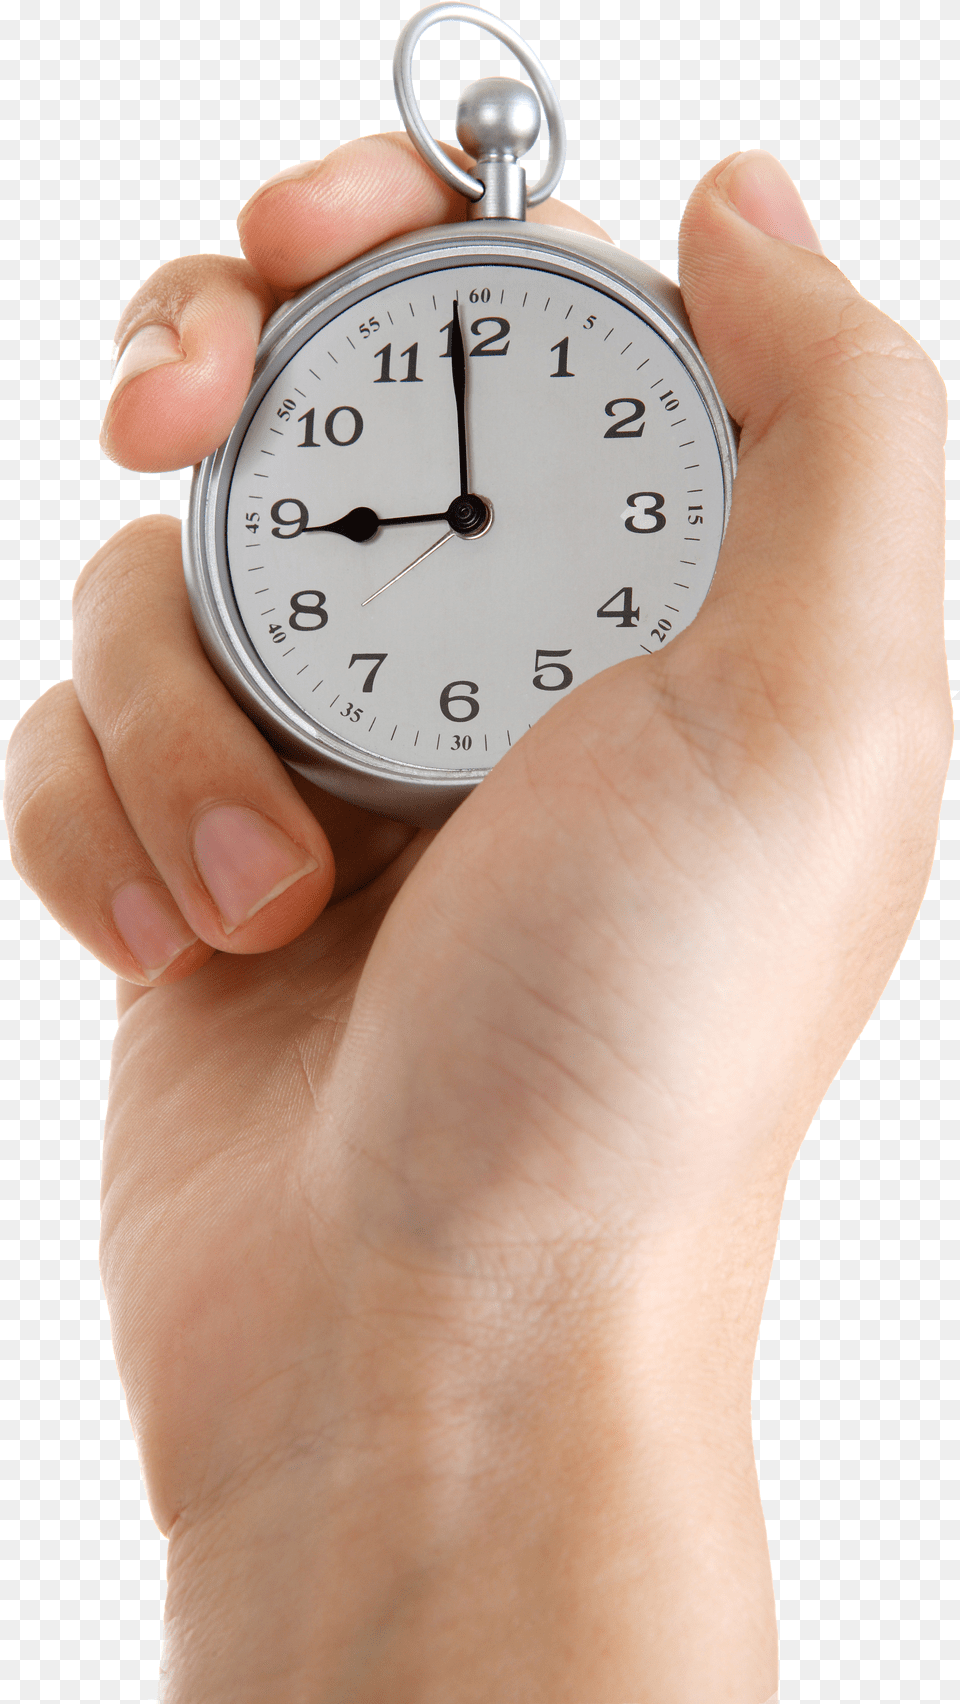 Stopwatch Transparent Wrist Hand Holding Clock Free Png Download